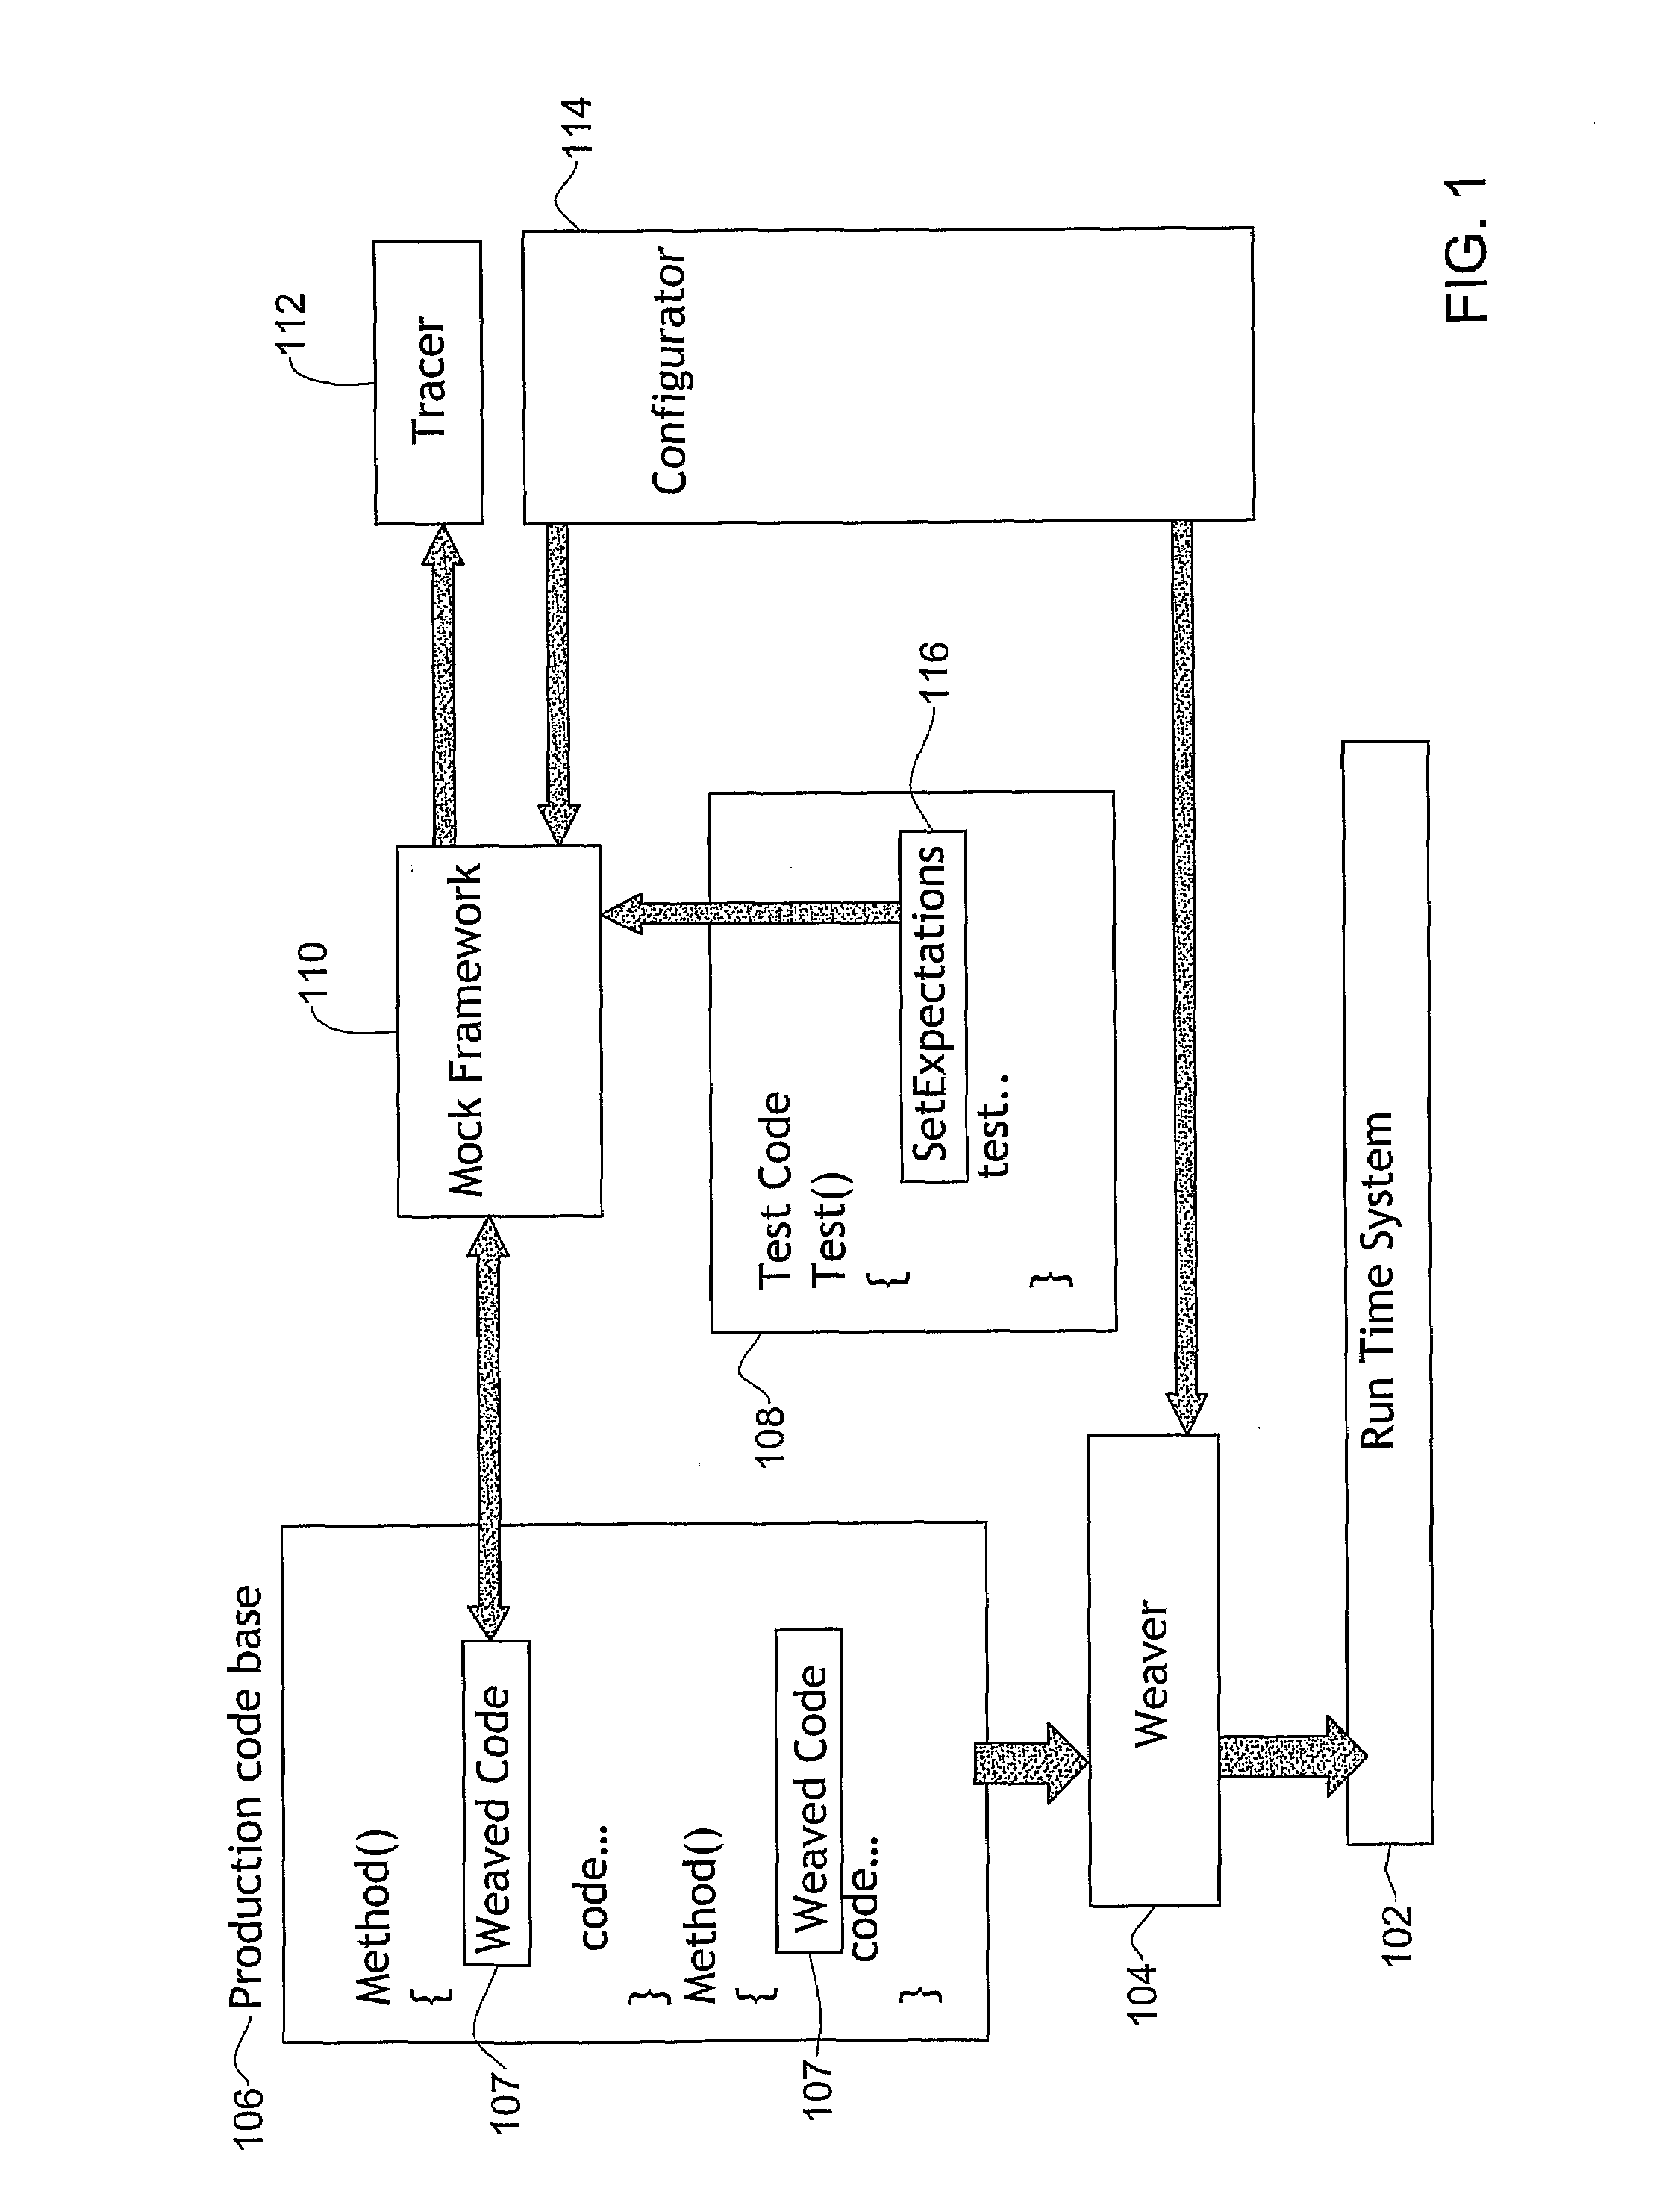 Method and system for isolating software components